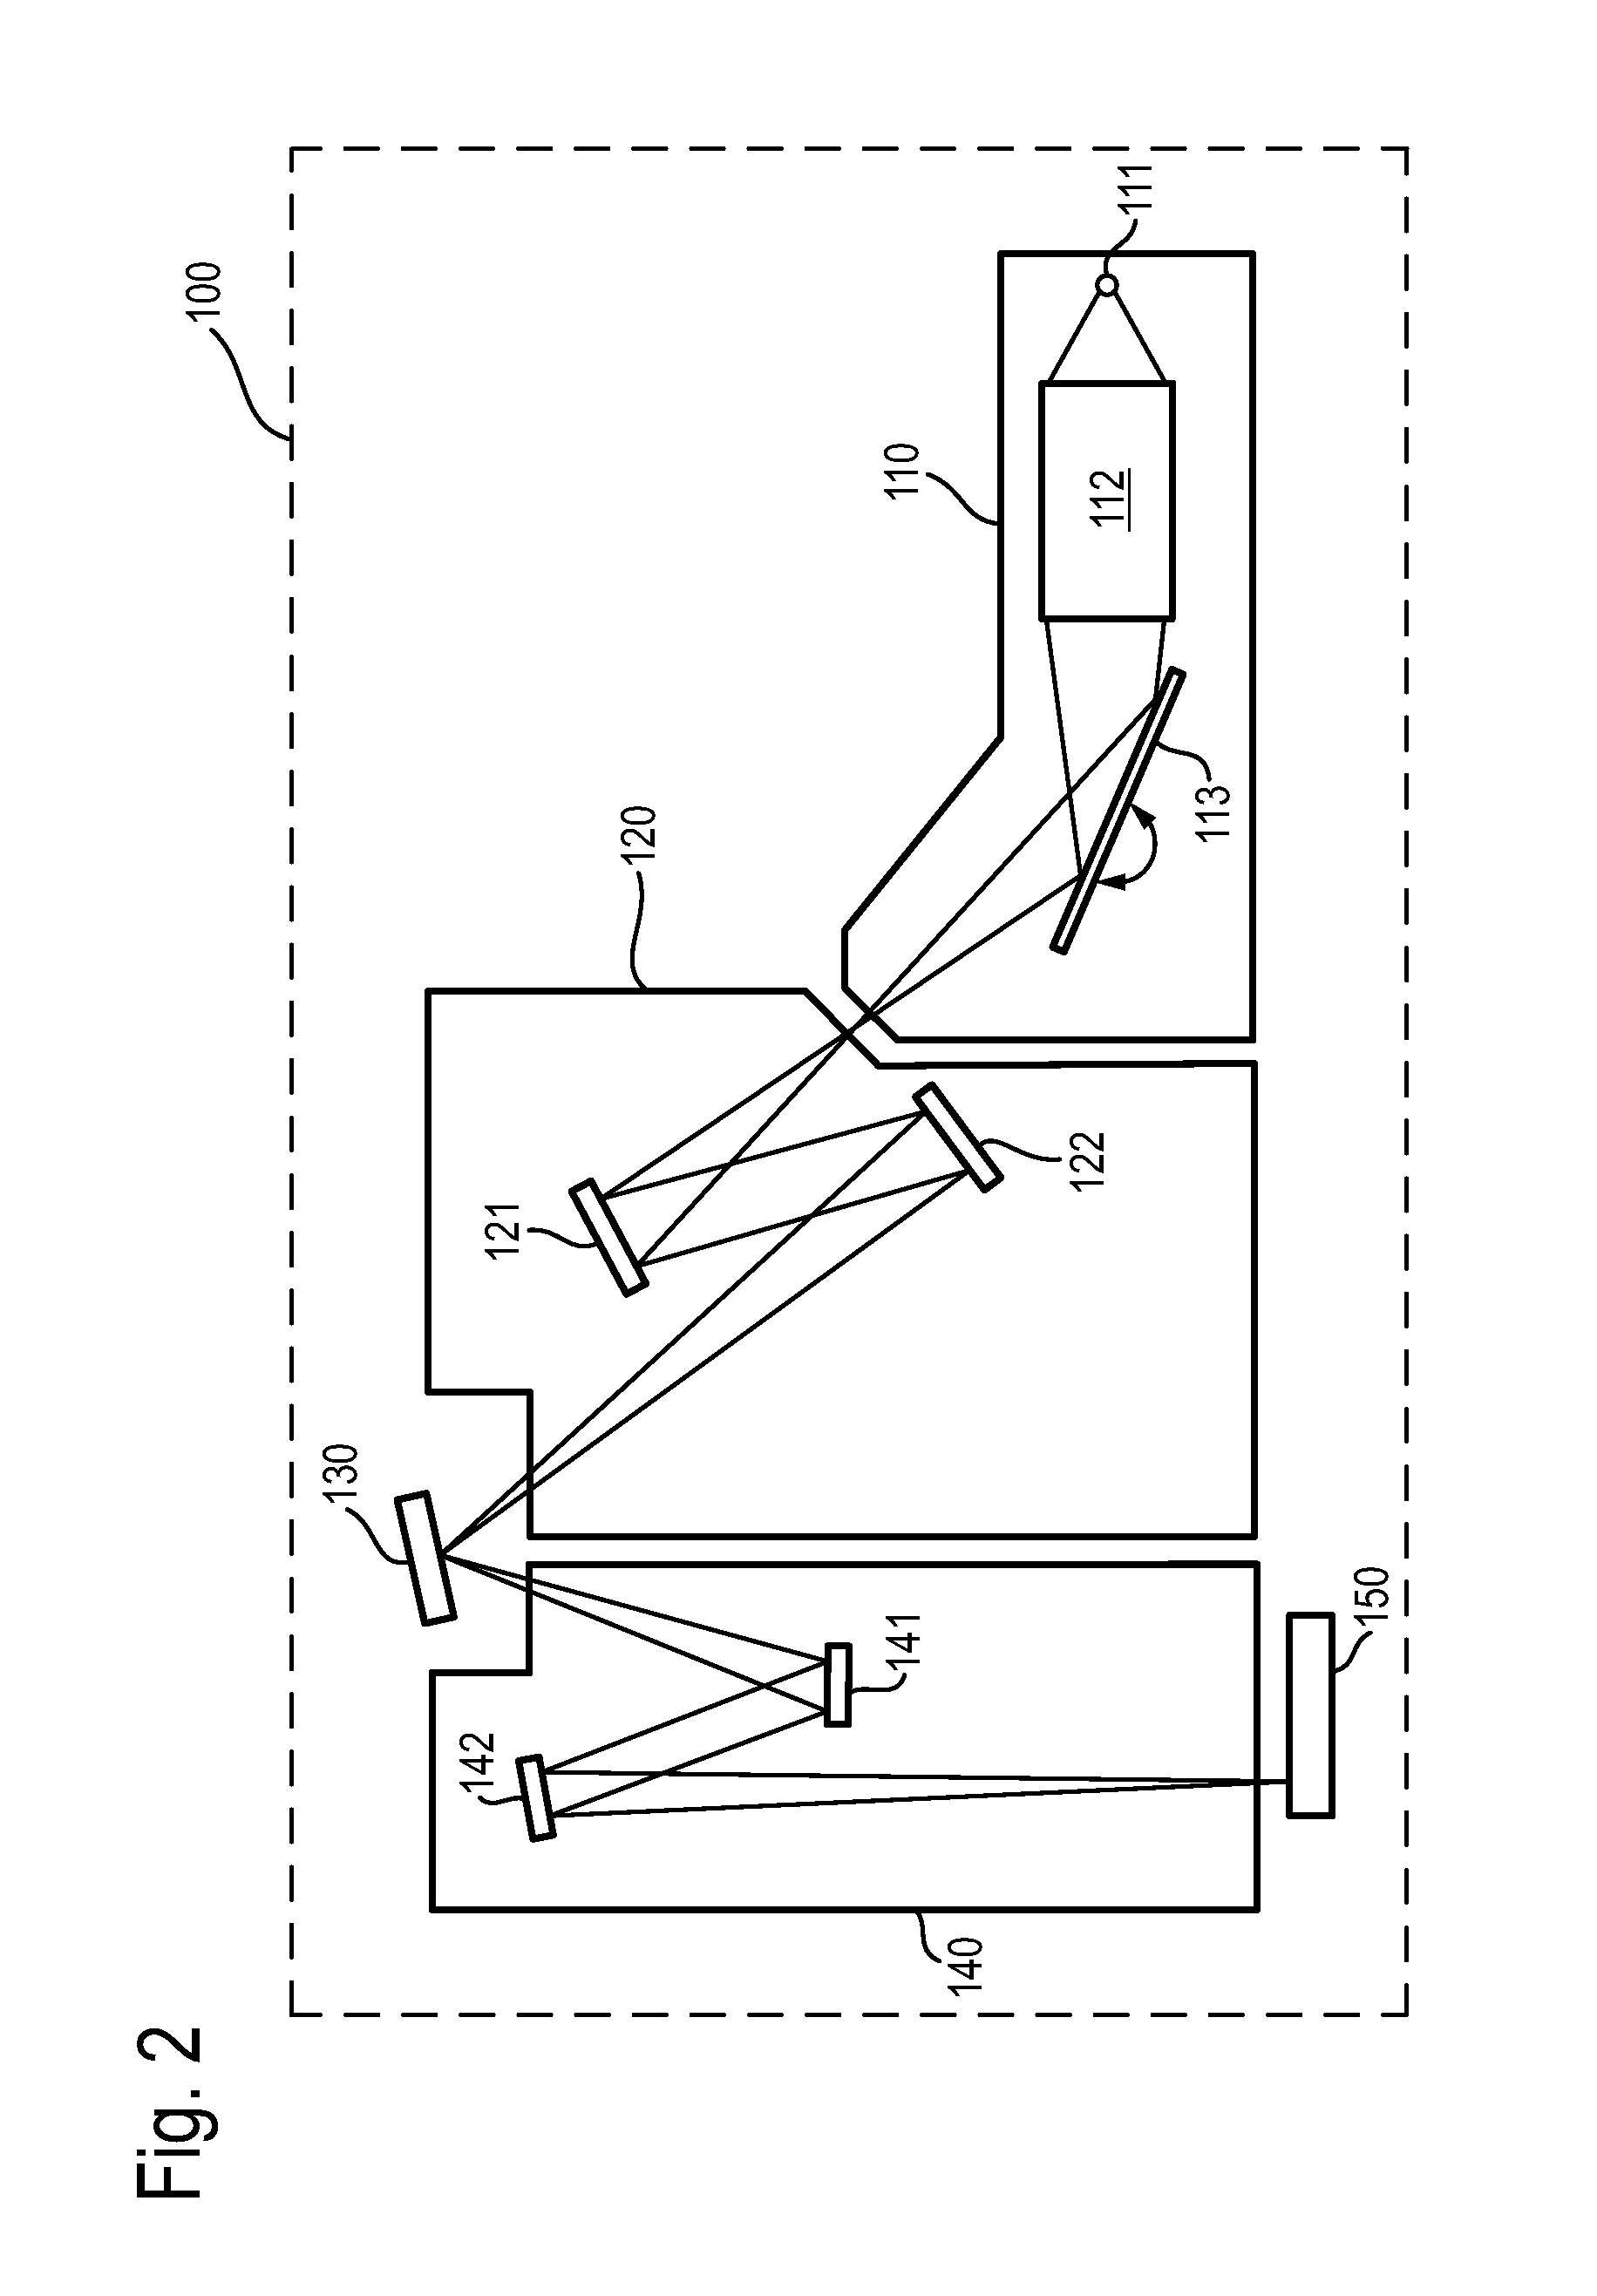 Component of an EUV or UV lithography apparatus and method for producing it